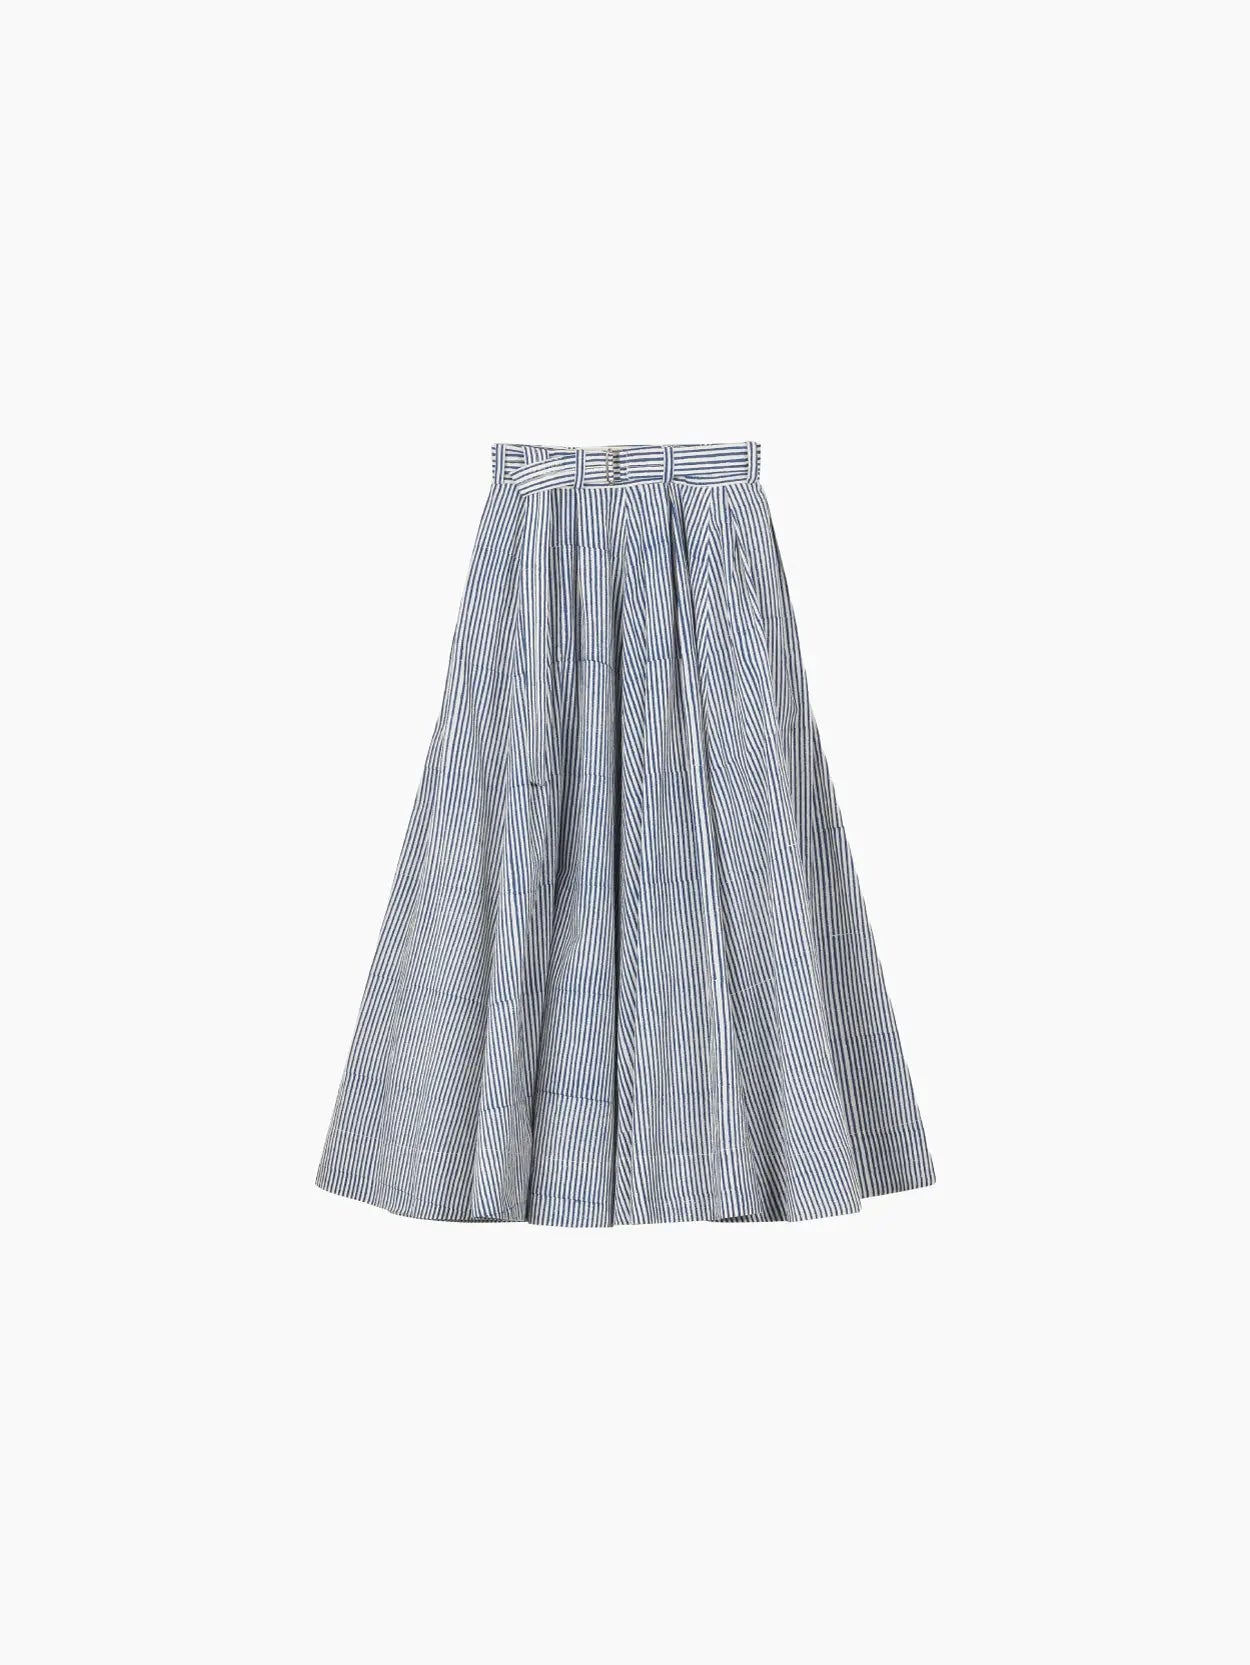 The Schrol Skirt Block Print Stripe by Jan Machenhauer is a high-waisted, A-line skirt with a full, pleated design. It features a thin, vertical pinstripe pattern in shades of blue and white. The skirt has a fitted waistband and extends to a midi length. The style is classic and elegant—available exclusively at Bassalstore in Barcelona.